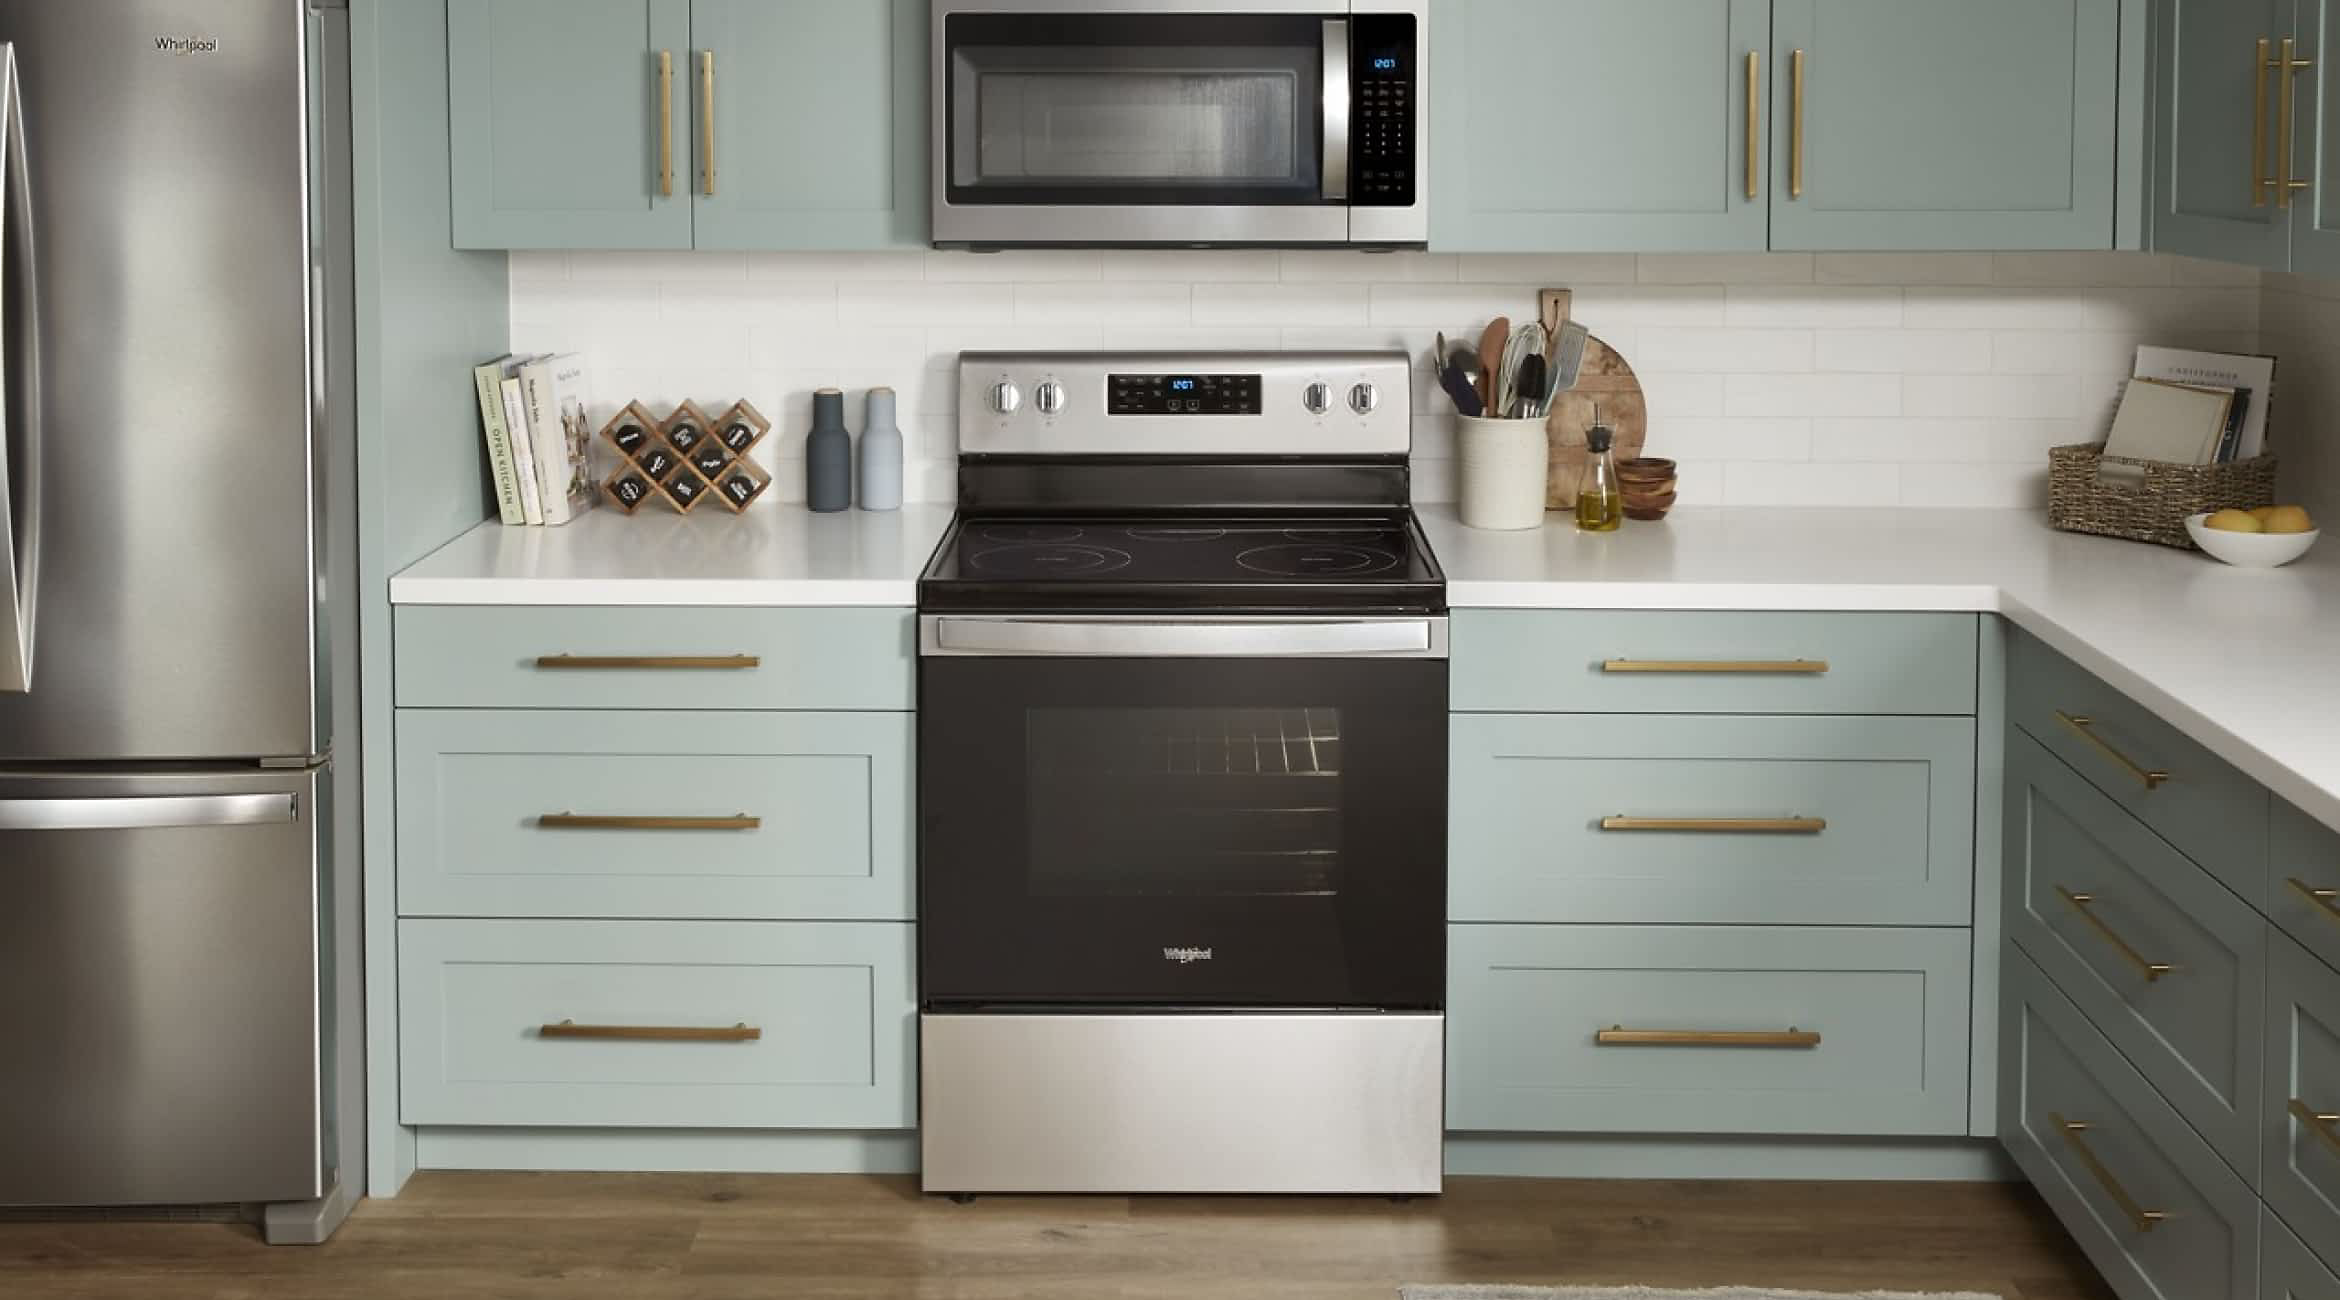 A Whirlpool® Standard Freestanding Range in a kitchen with green cabinets